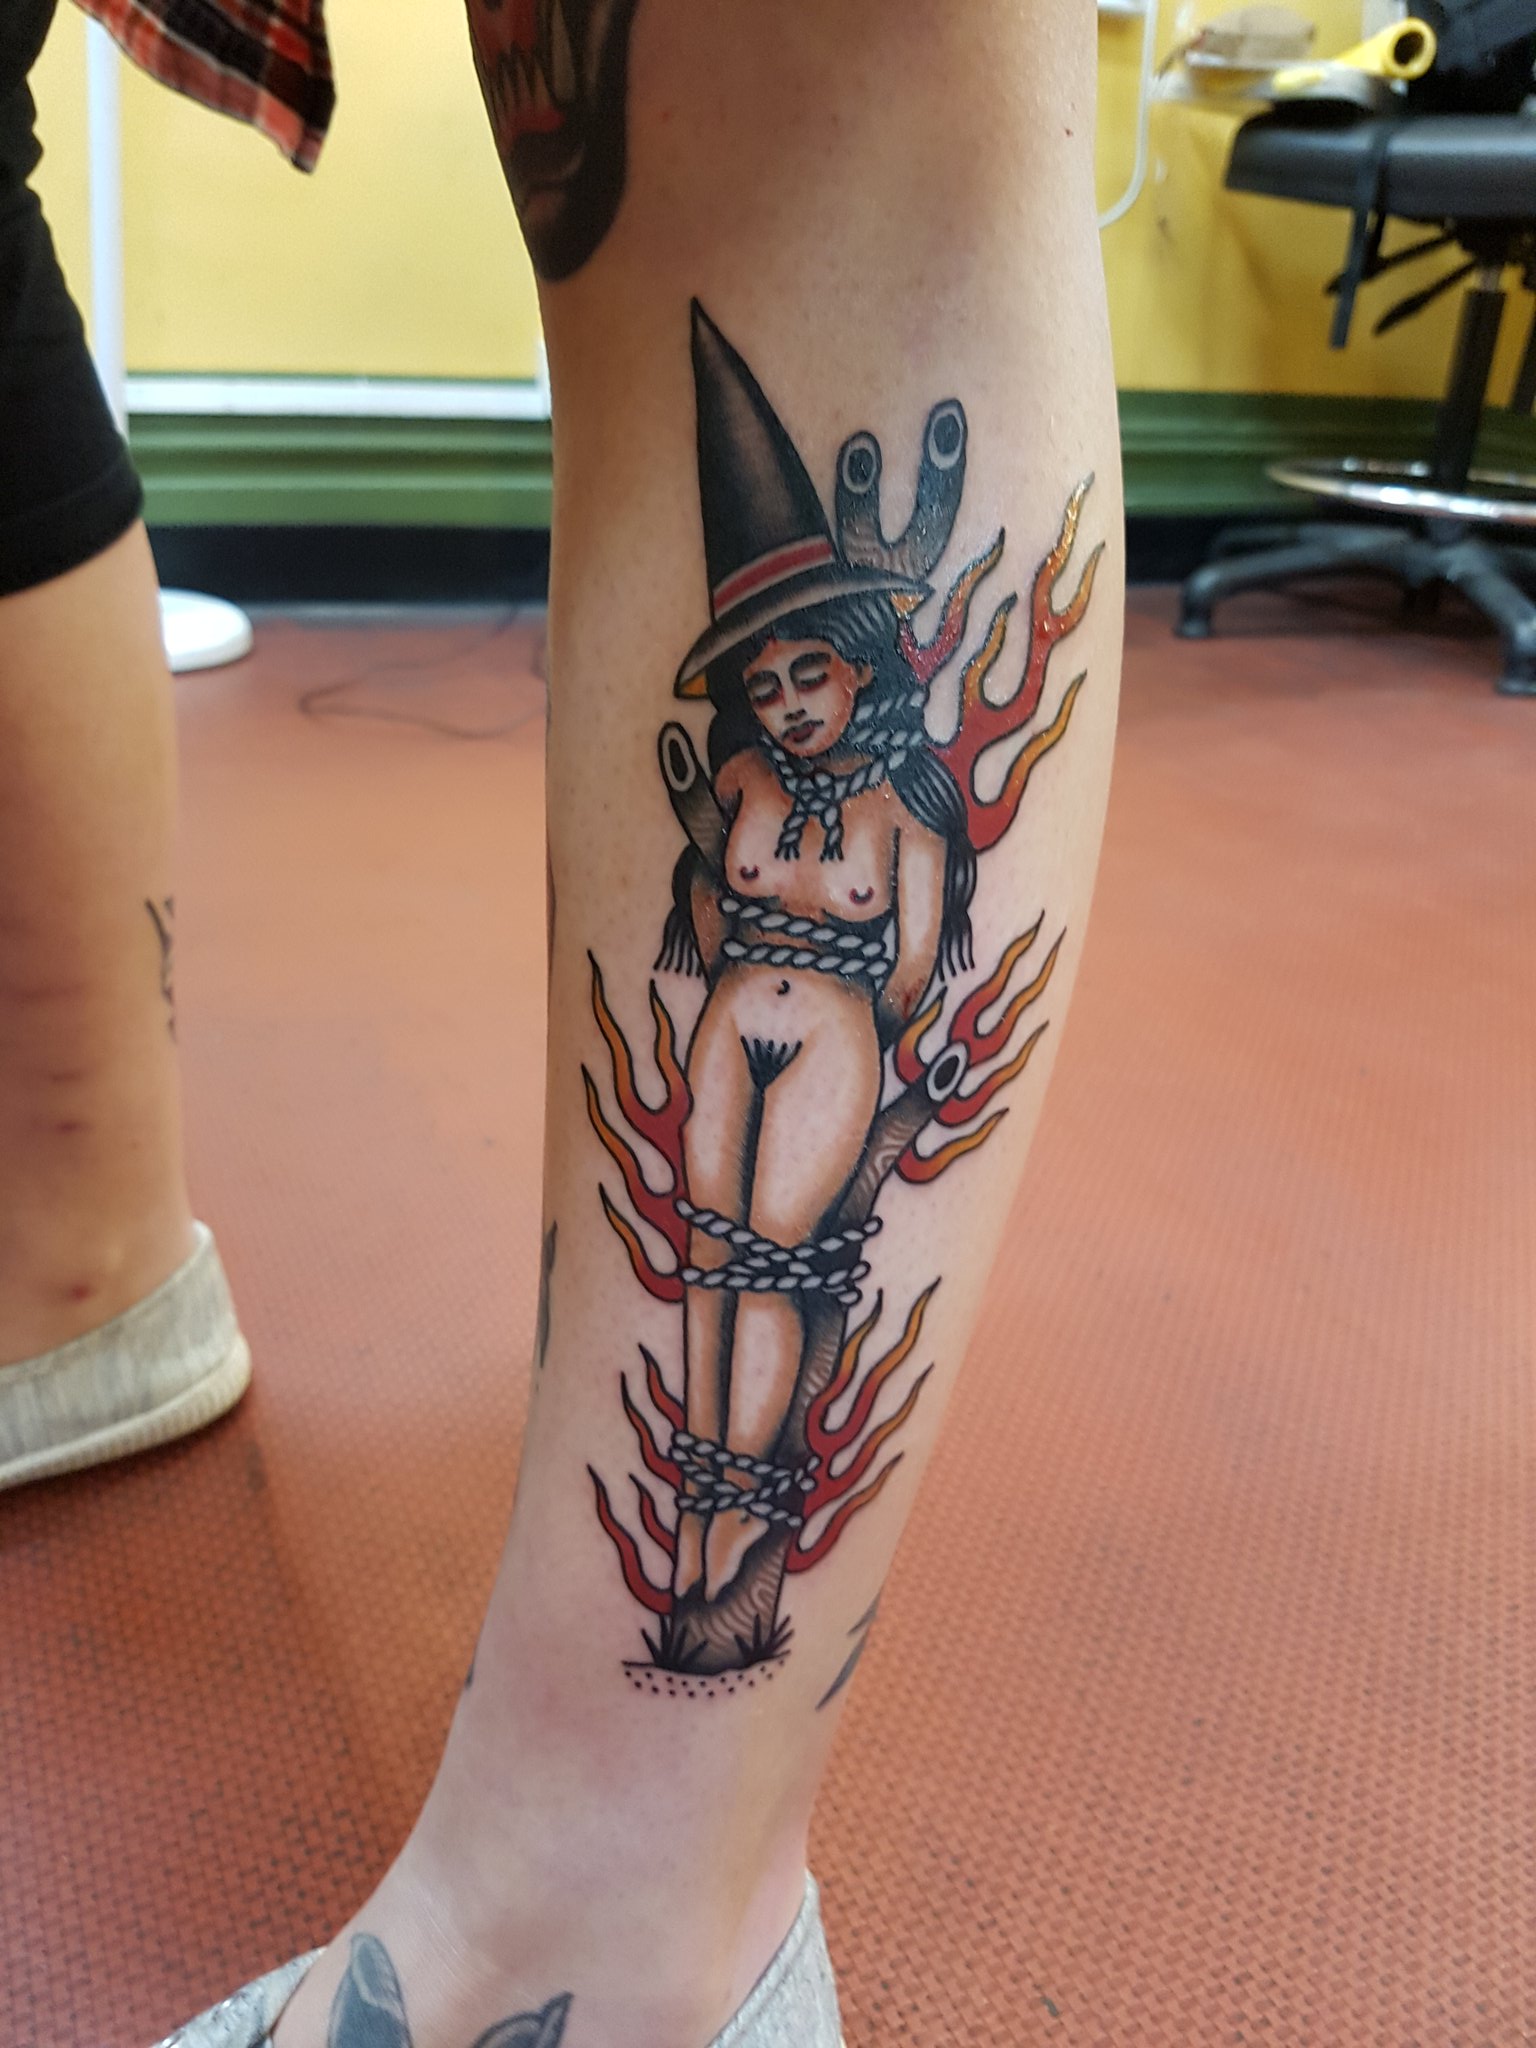 Erin Grant on Twitter Stoked on my new witch tattoo you can burn me at  the stake but youll never take my badass pointy hat  httpstco9a77qodVXY  Twitter